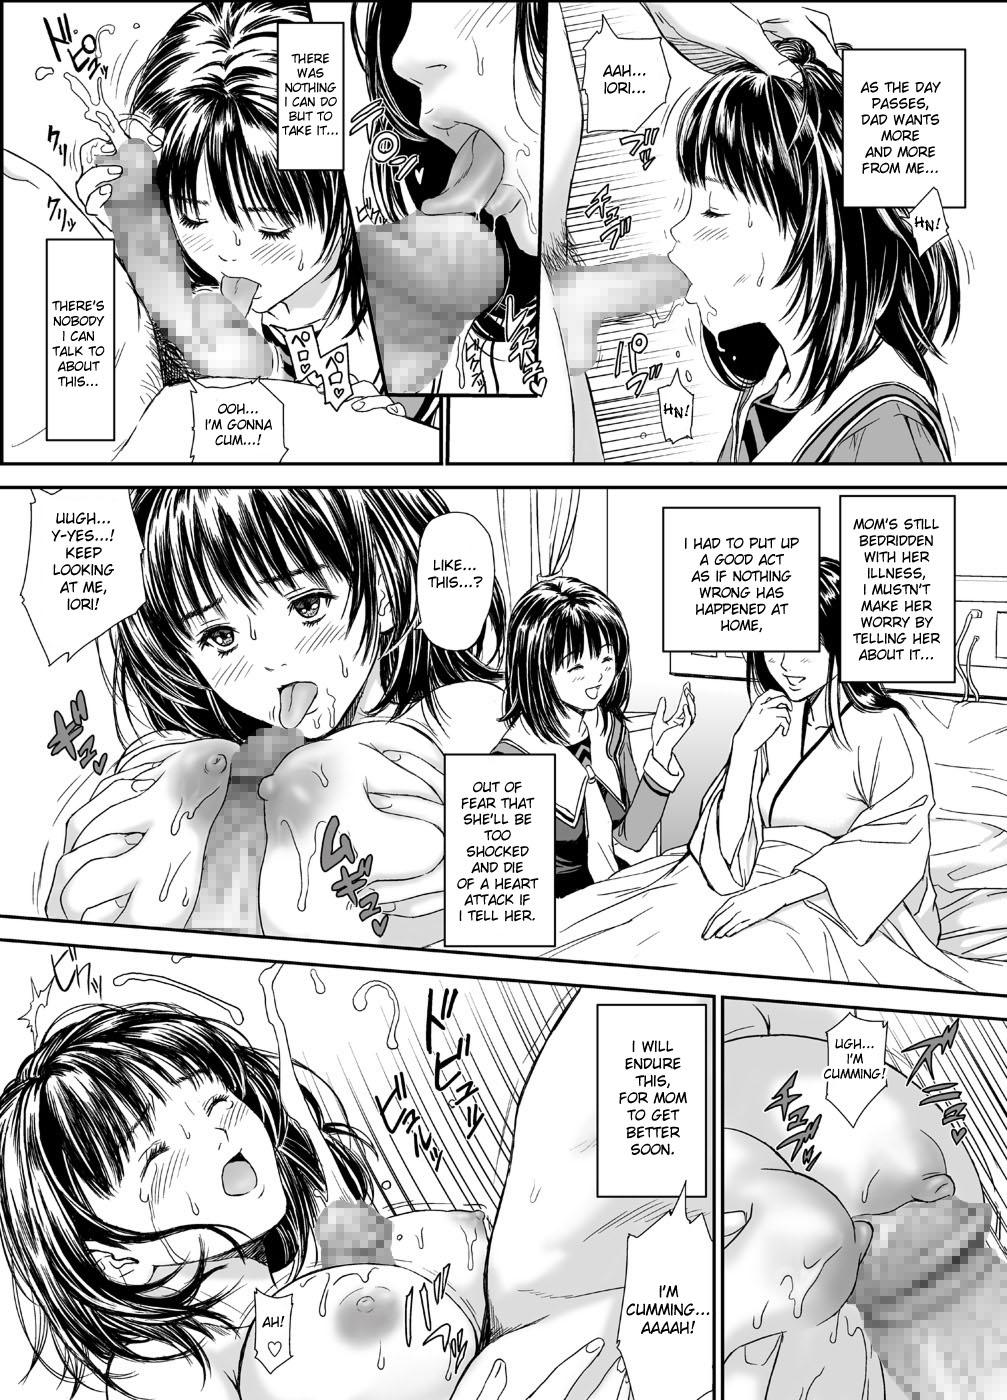 Bribe Iori - The Dark Side Of That Girl - Is Sofa - Page 12